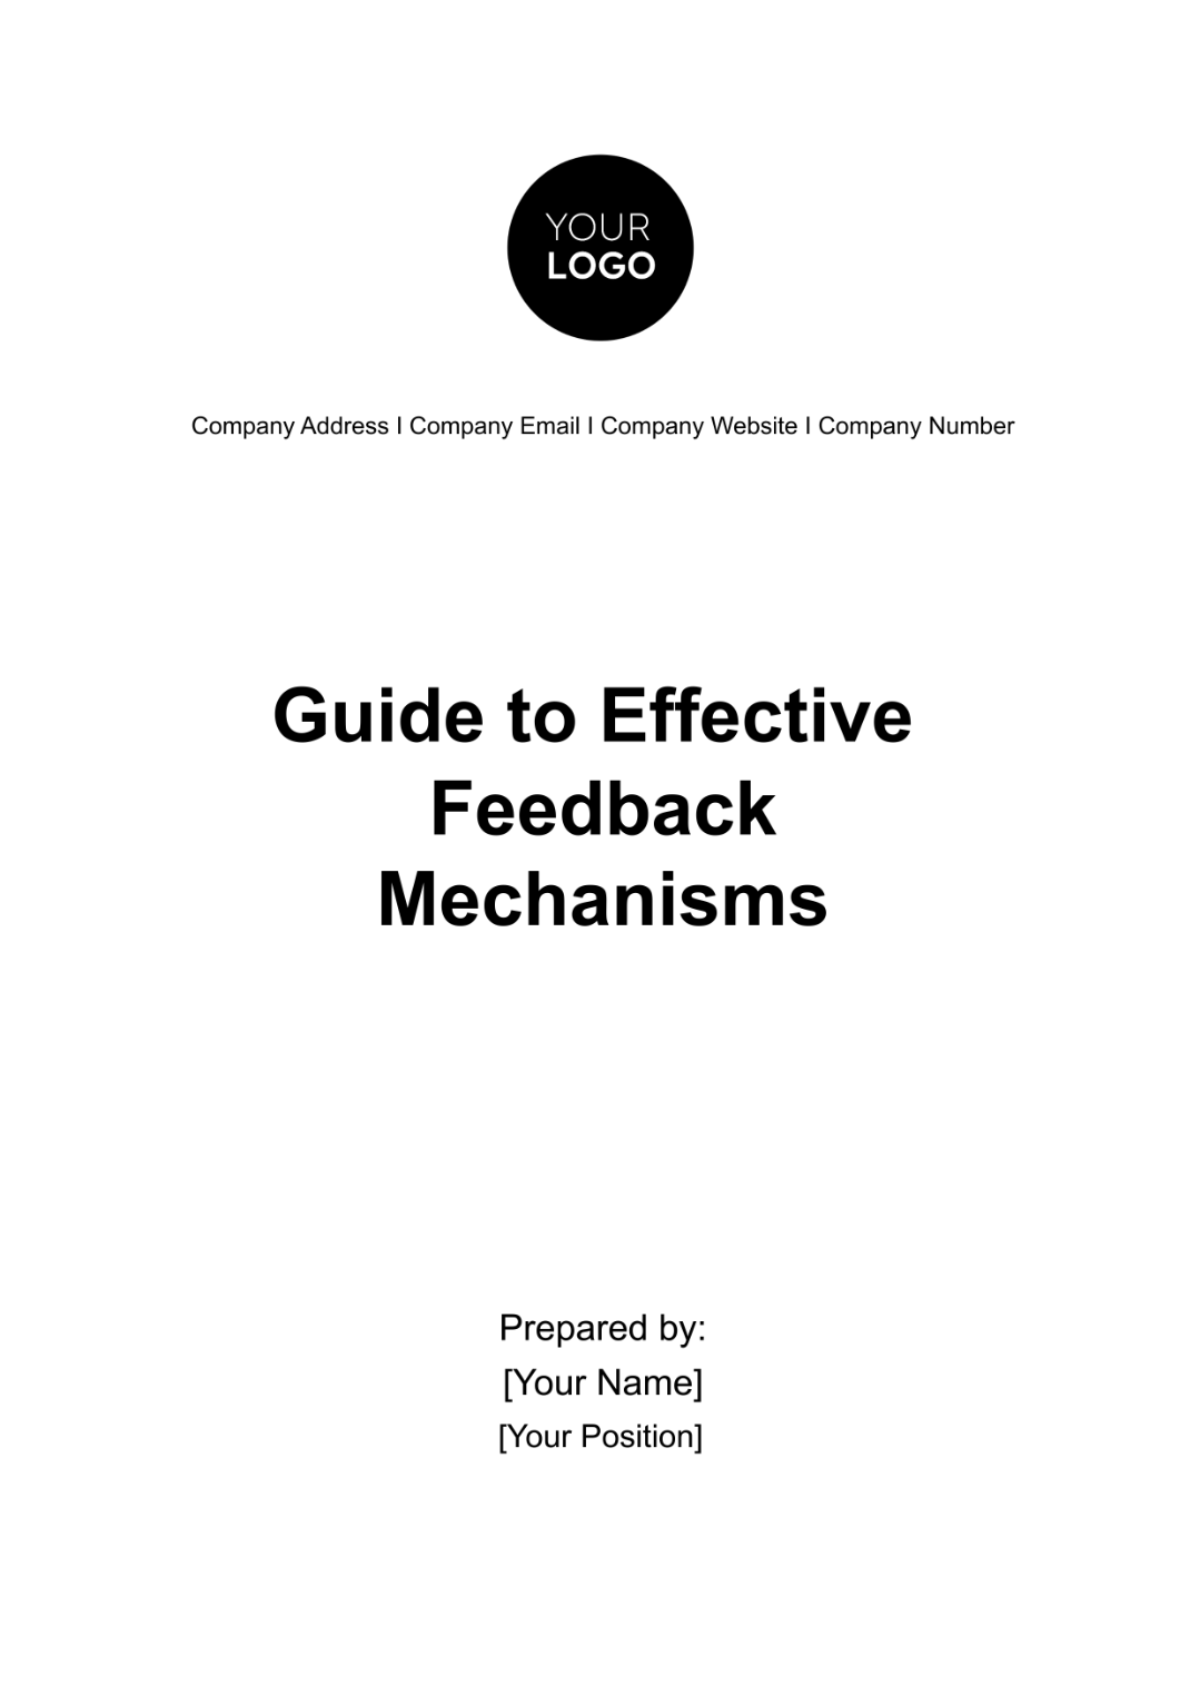 Guide to Effective Feedback Mechanisms HR Template